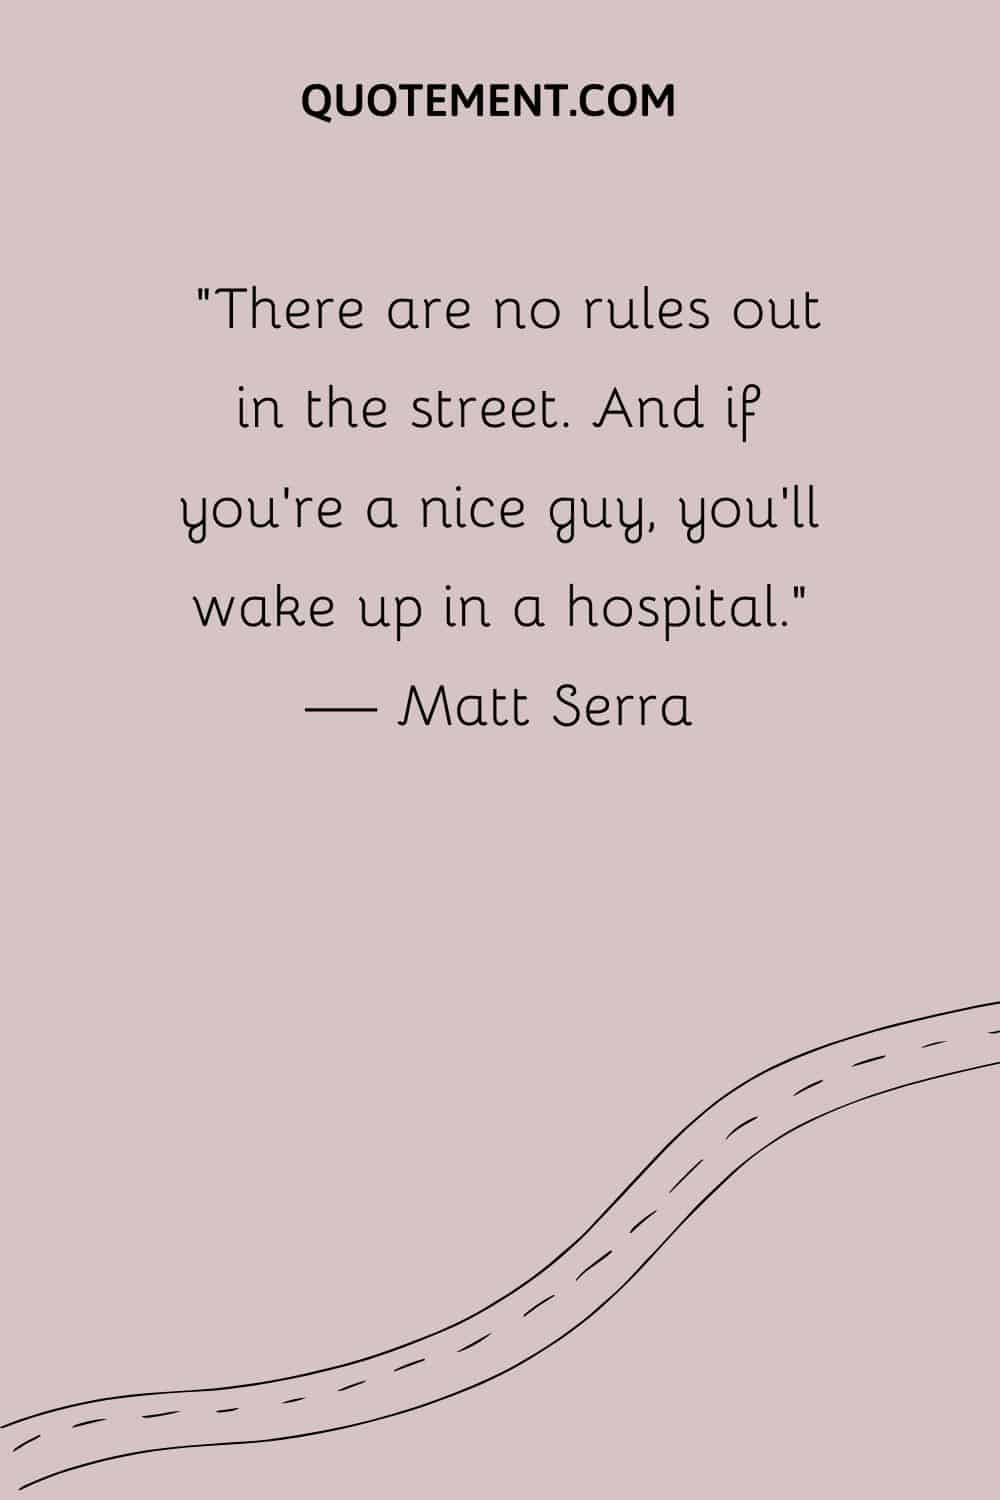 There are no rules out in the street. And if you're a nice guy, you'll wake up in a hospital